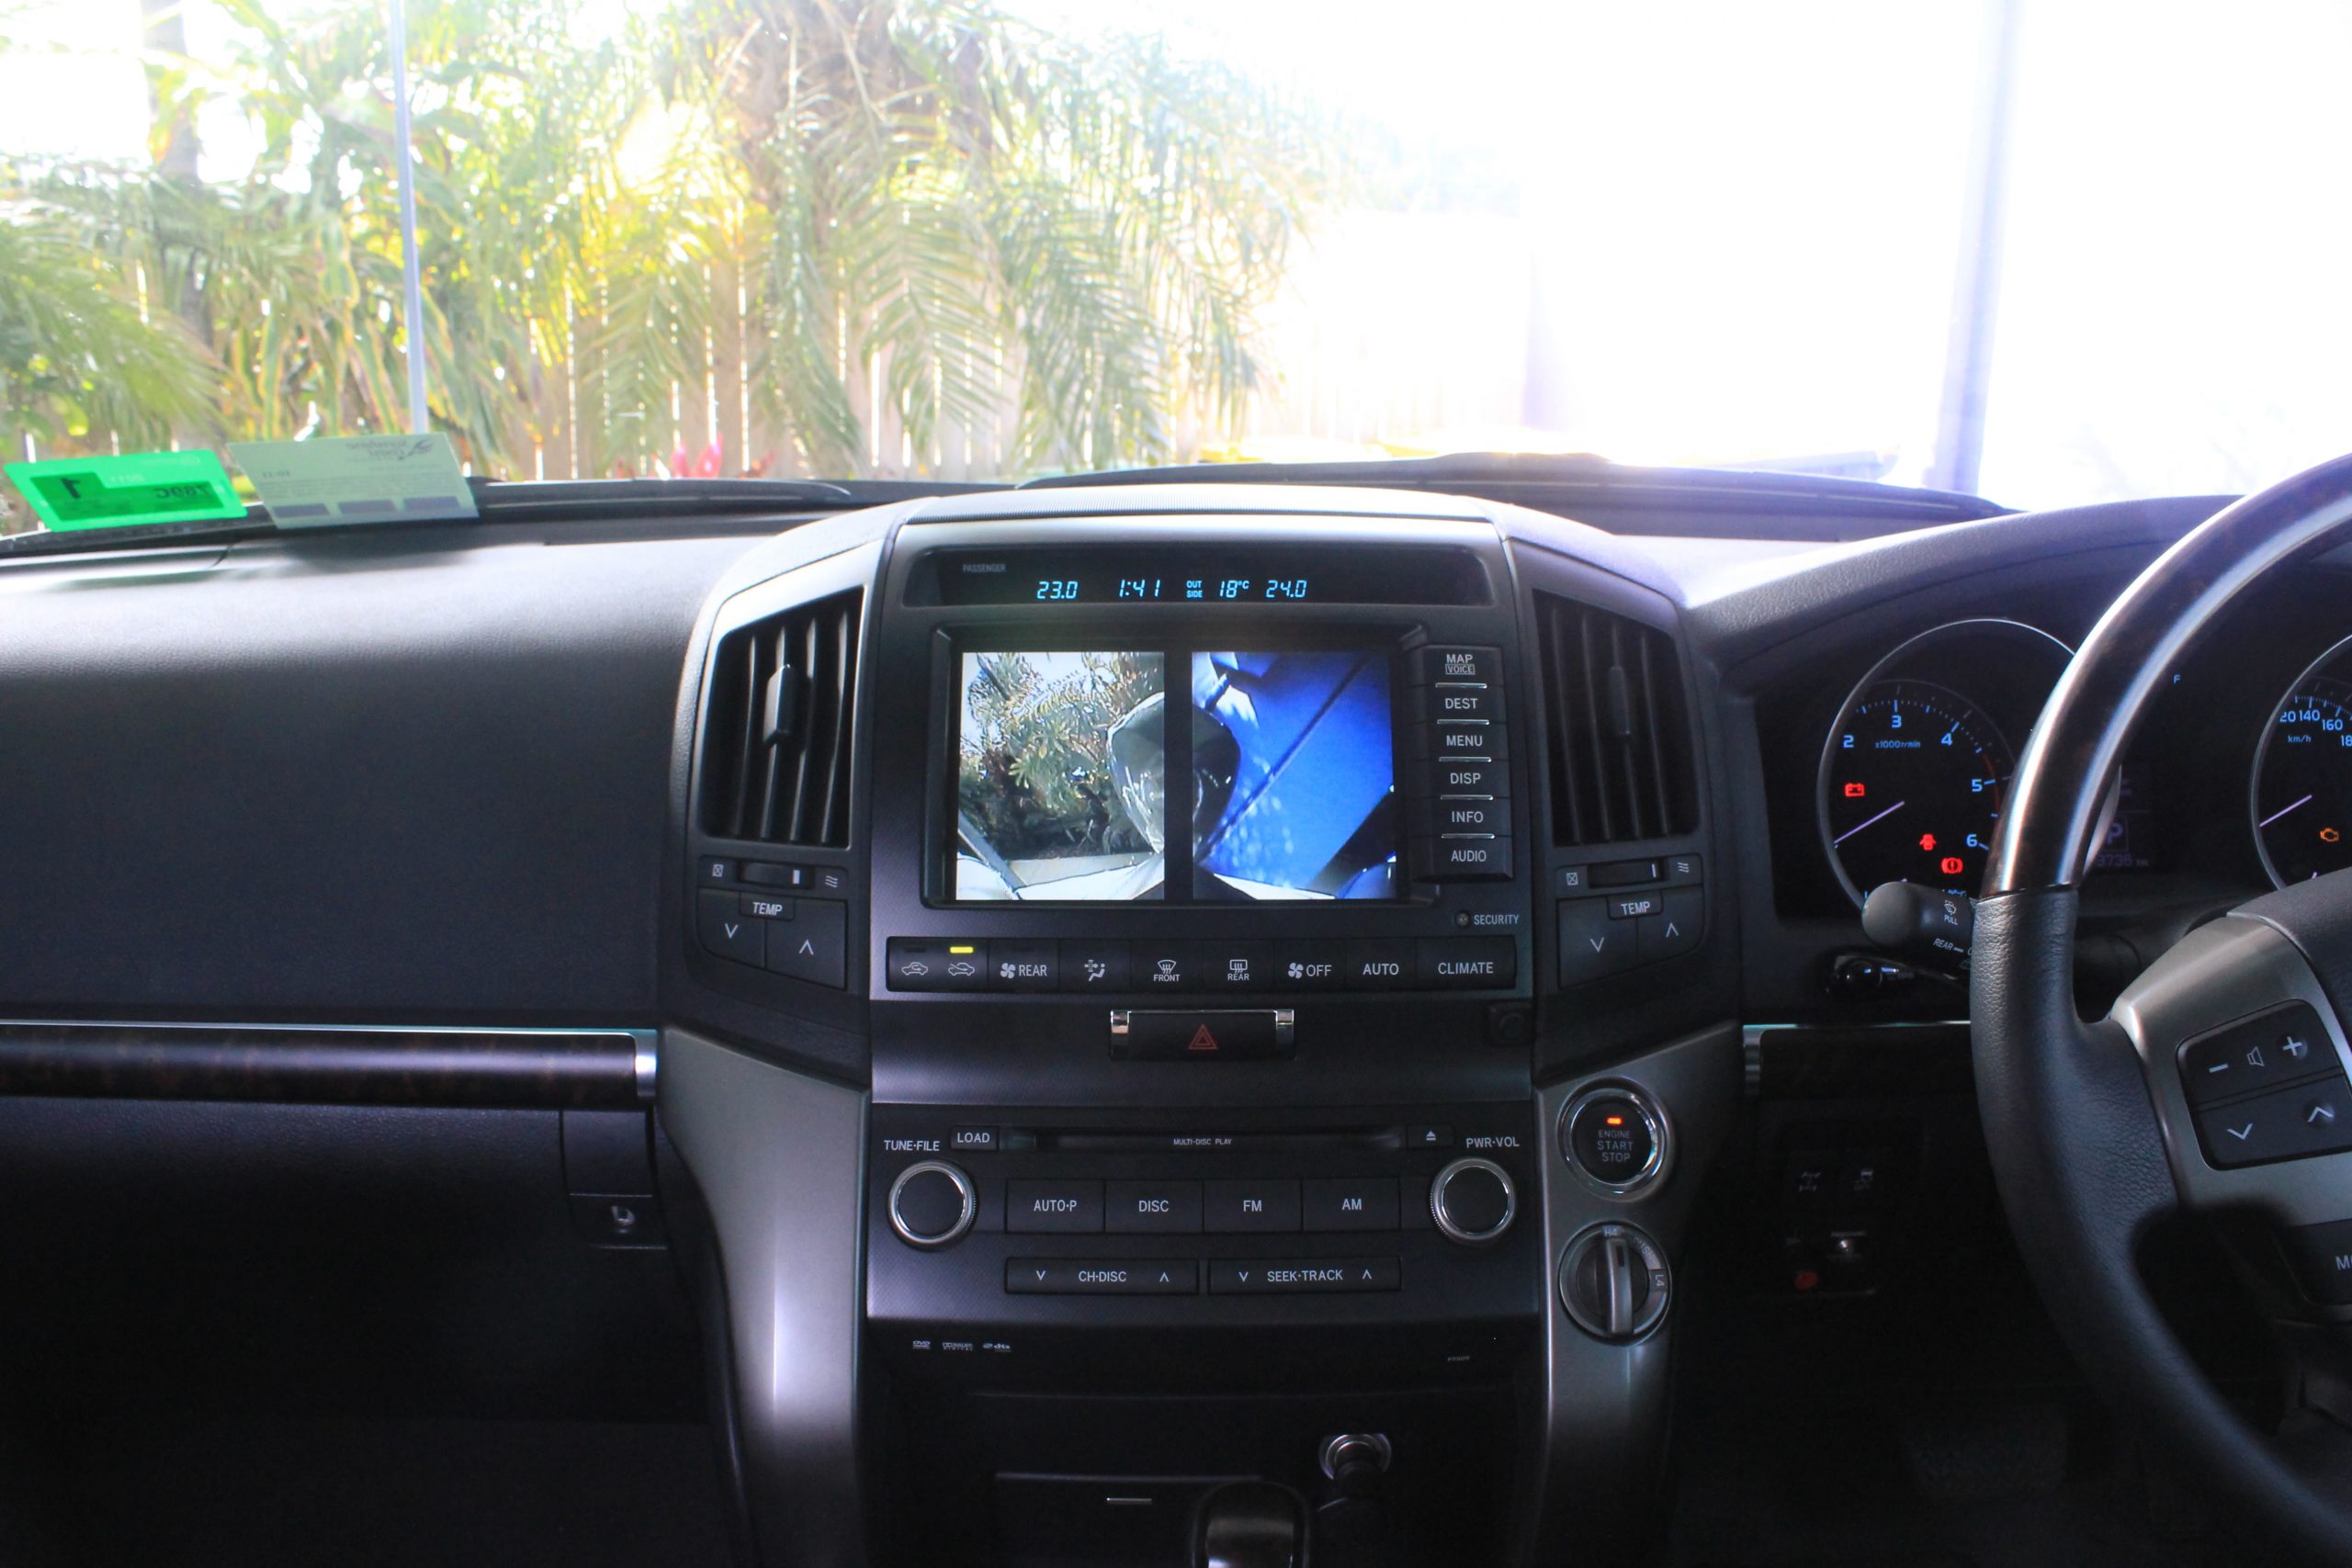 Toyota Landcruiser 200 series Sahara A.V interface for front camera and ipod video interface